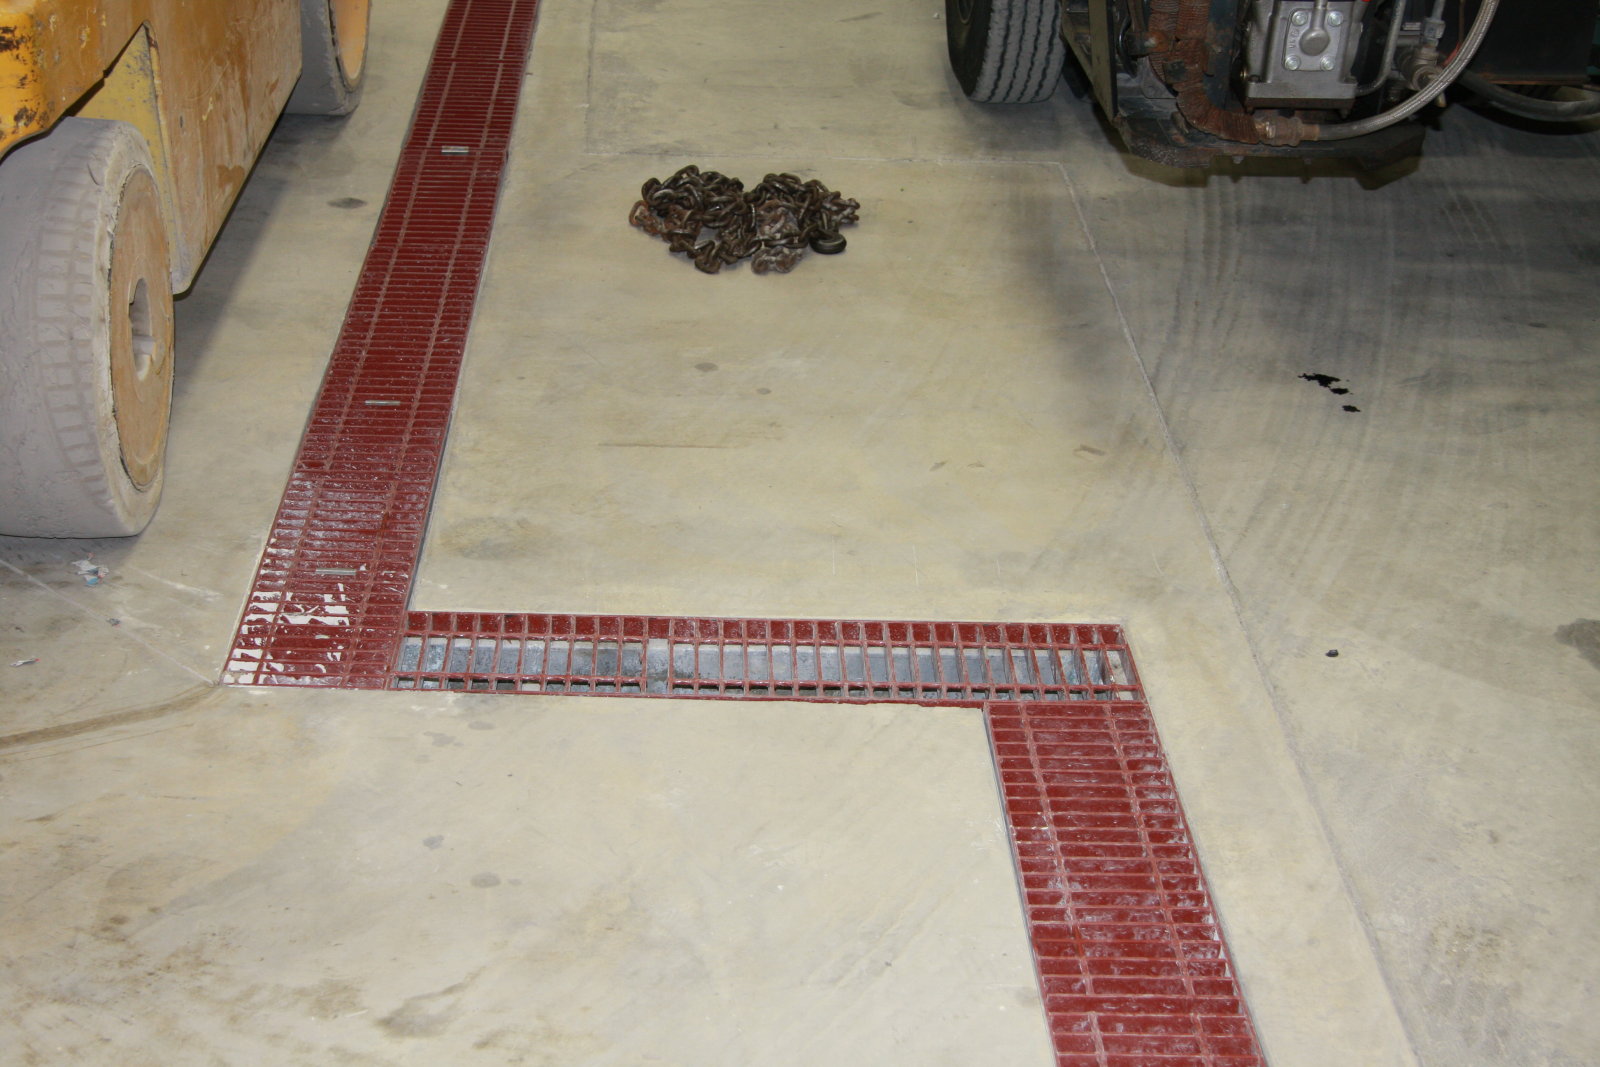 Manufacturing facility using steel grate with elbows. 